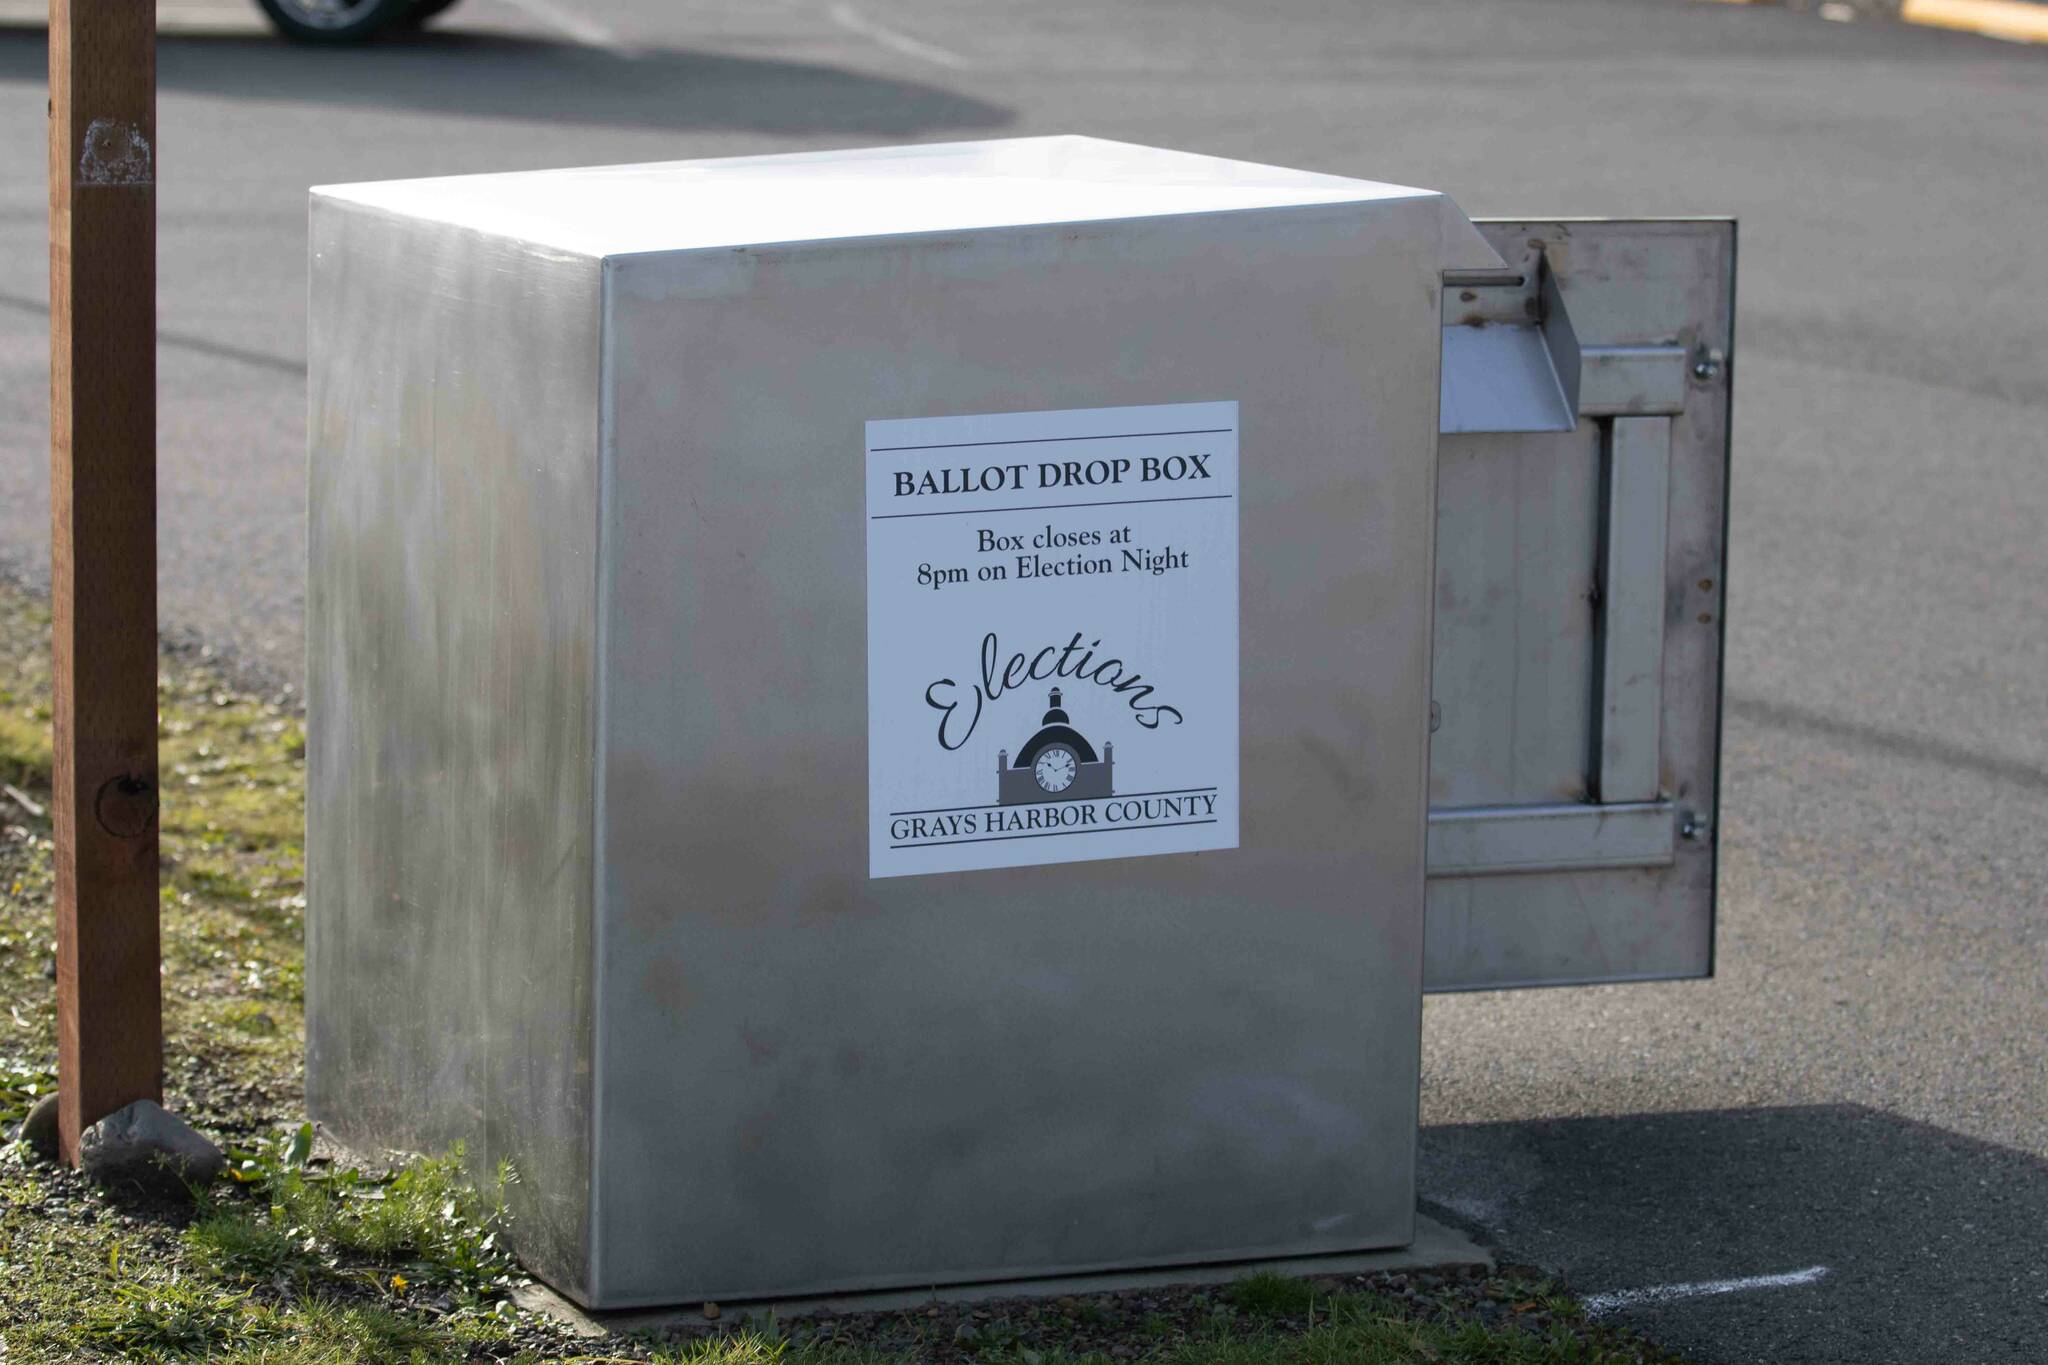 Courtesy of Joe Maclean
Pictured here, a ballot box installed in Ocean Shores last year has a similar design to the new, sturdier ballot boxes that will soon be implemented across Grays Harbor County.